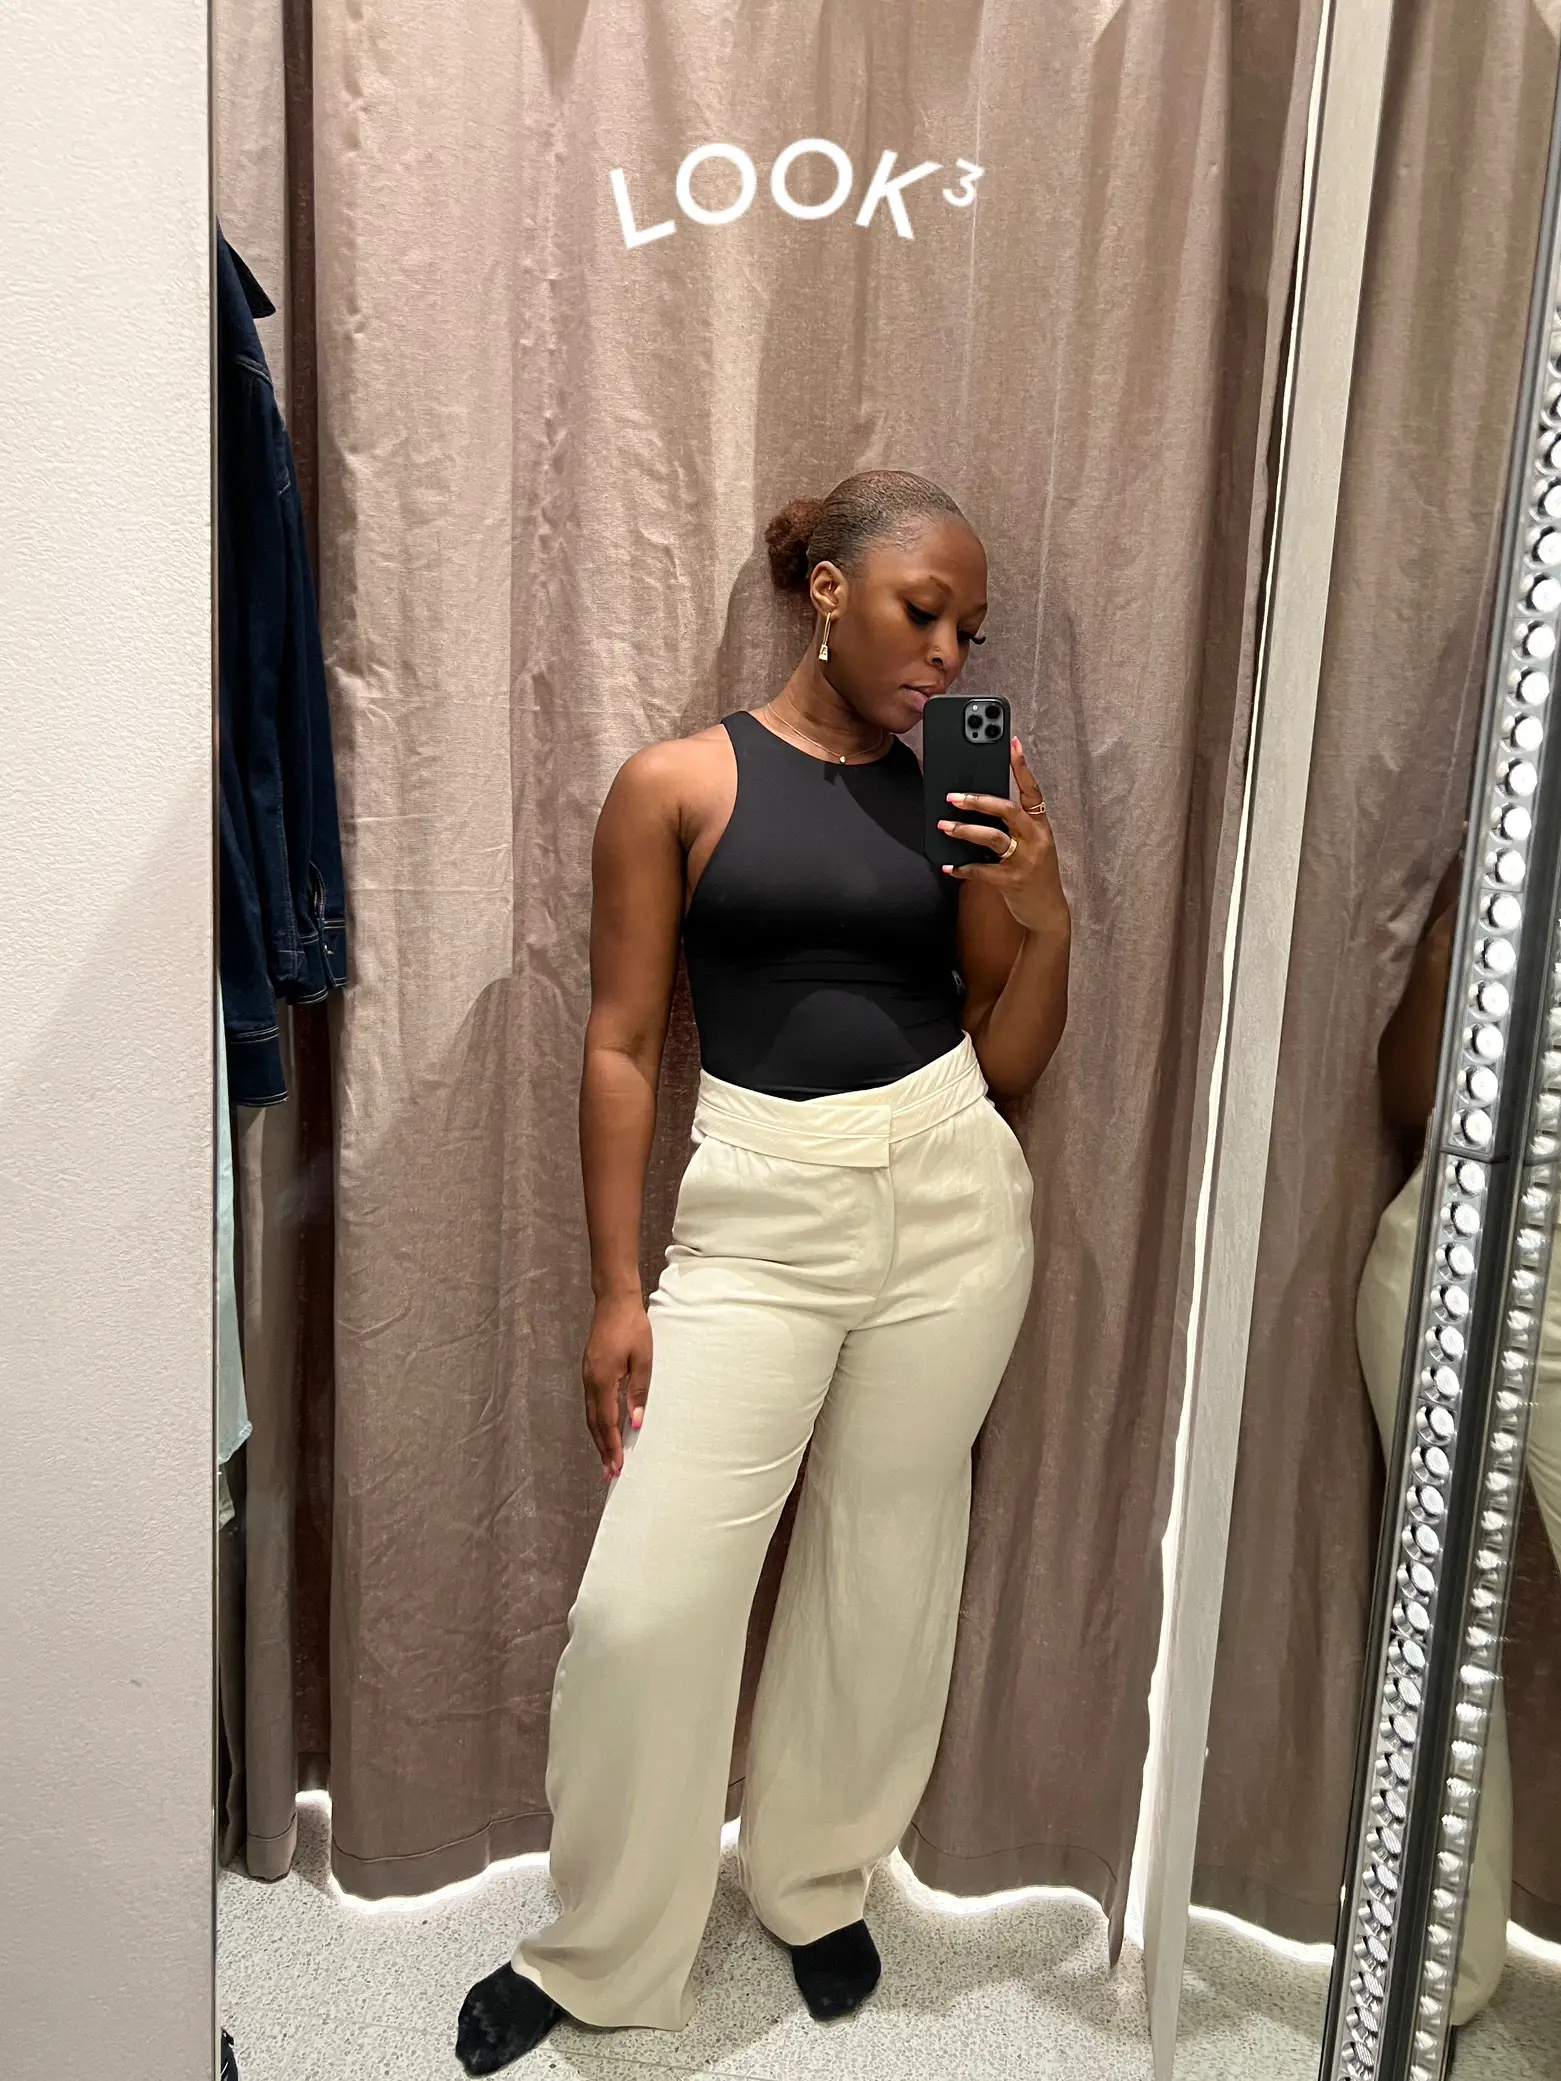 Lookbook: New in pants at Zara!, Gallery posted by lexuscrystal